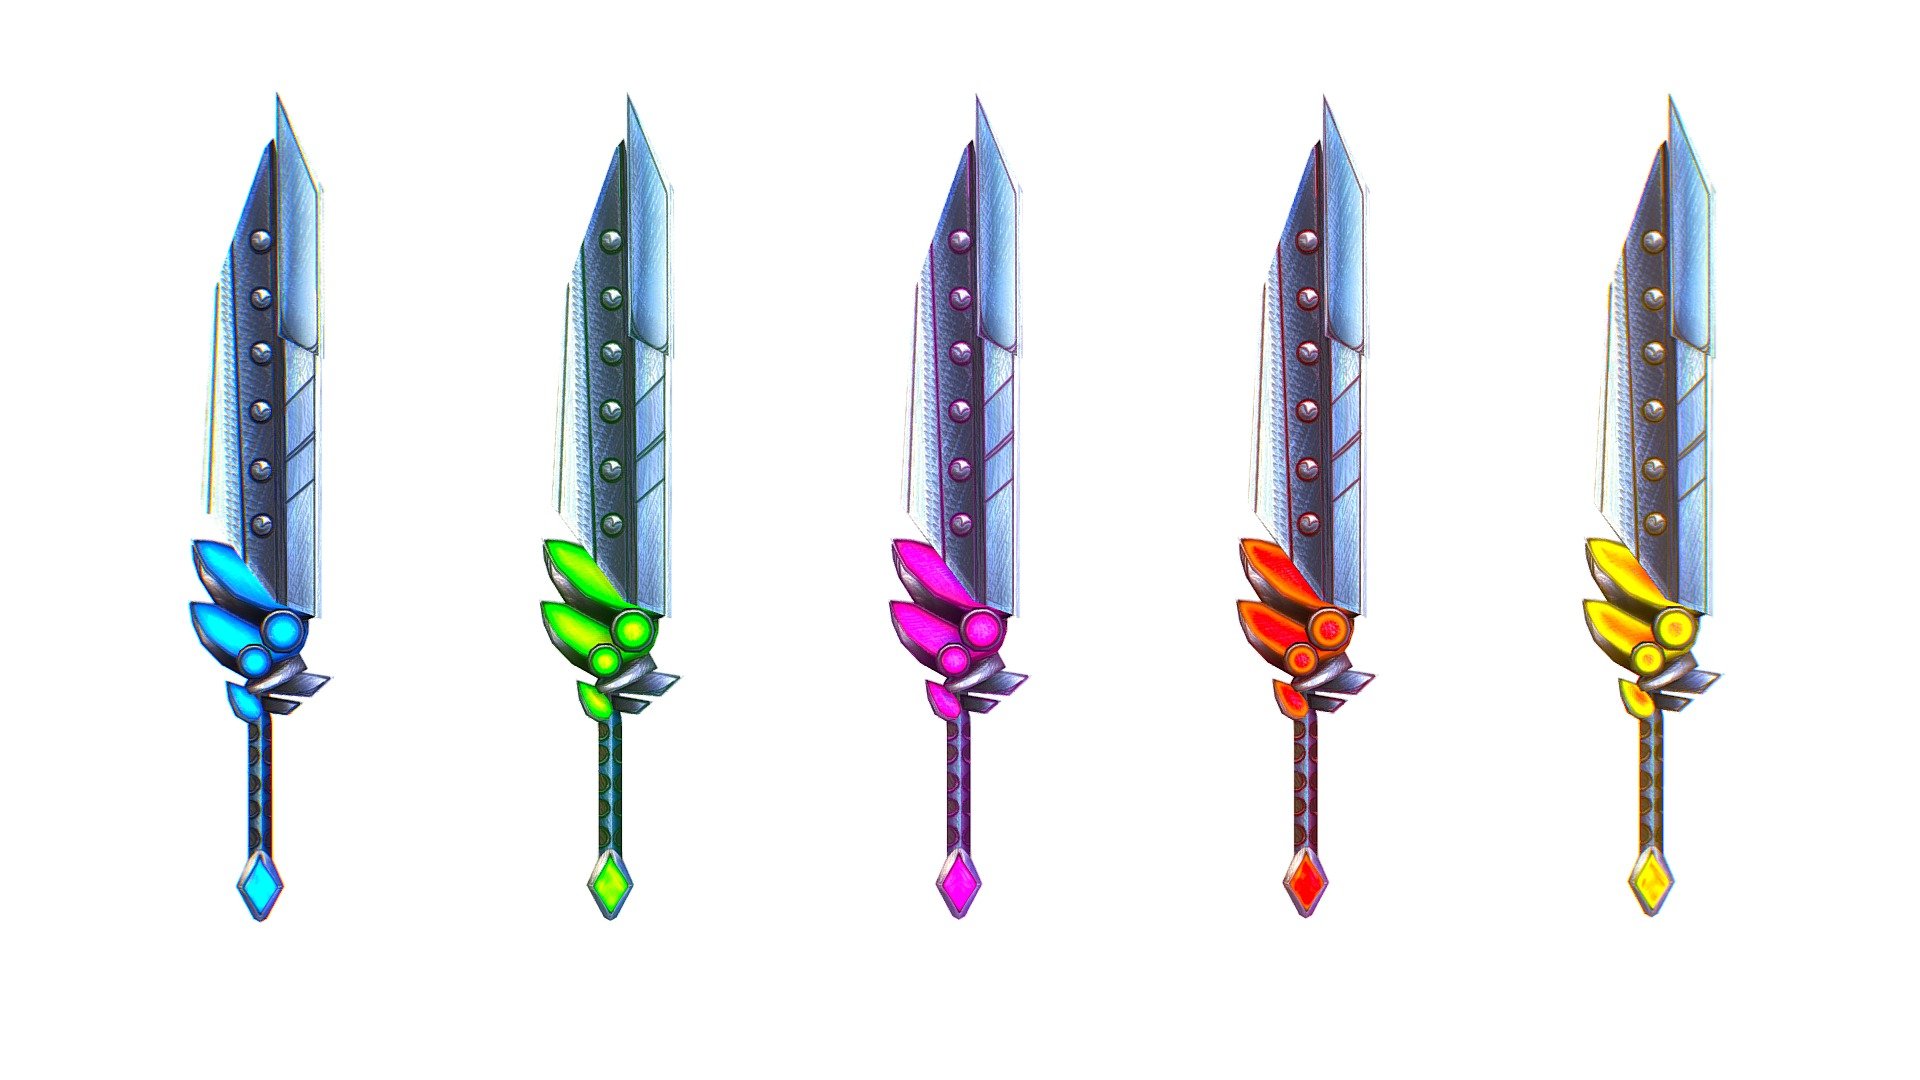 a set of cutting weapons  - 3dsMax /  PSD  and Concept File included 3d model